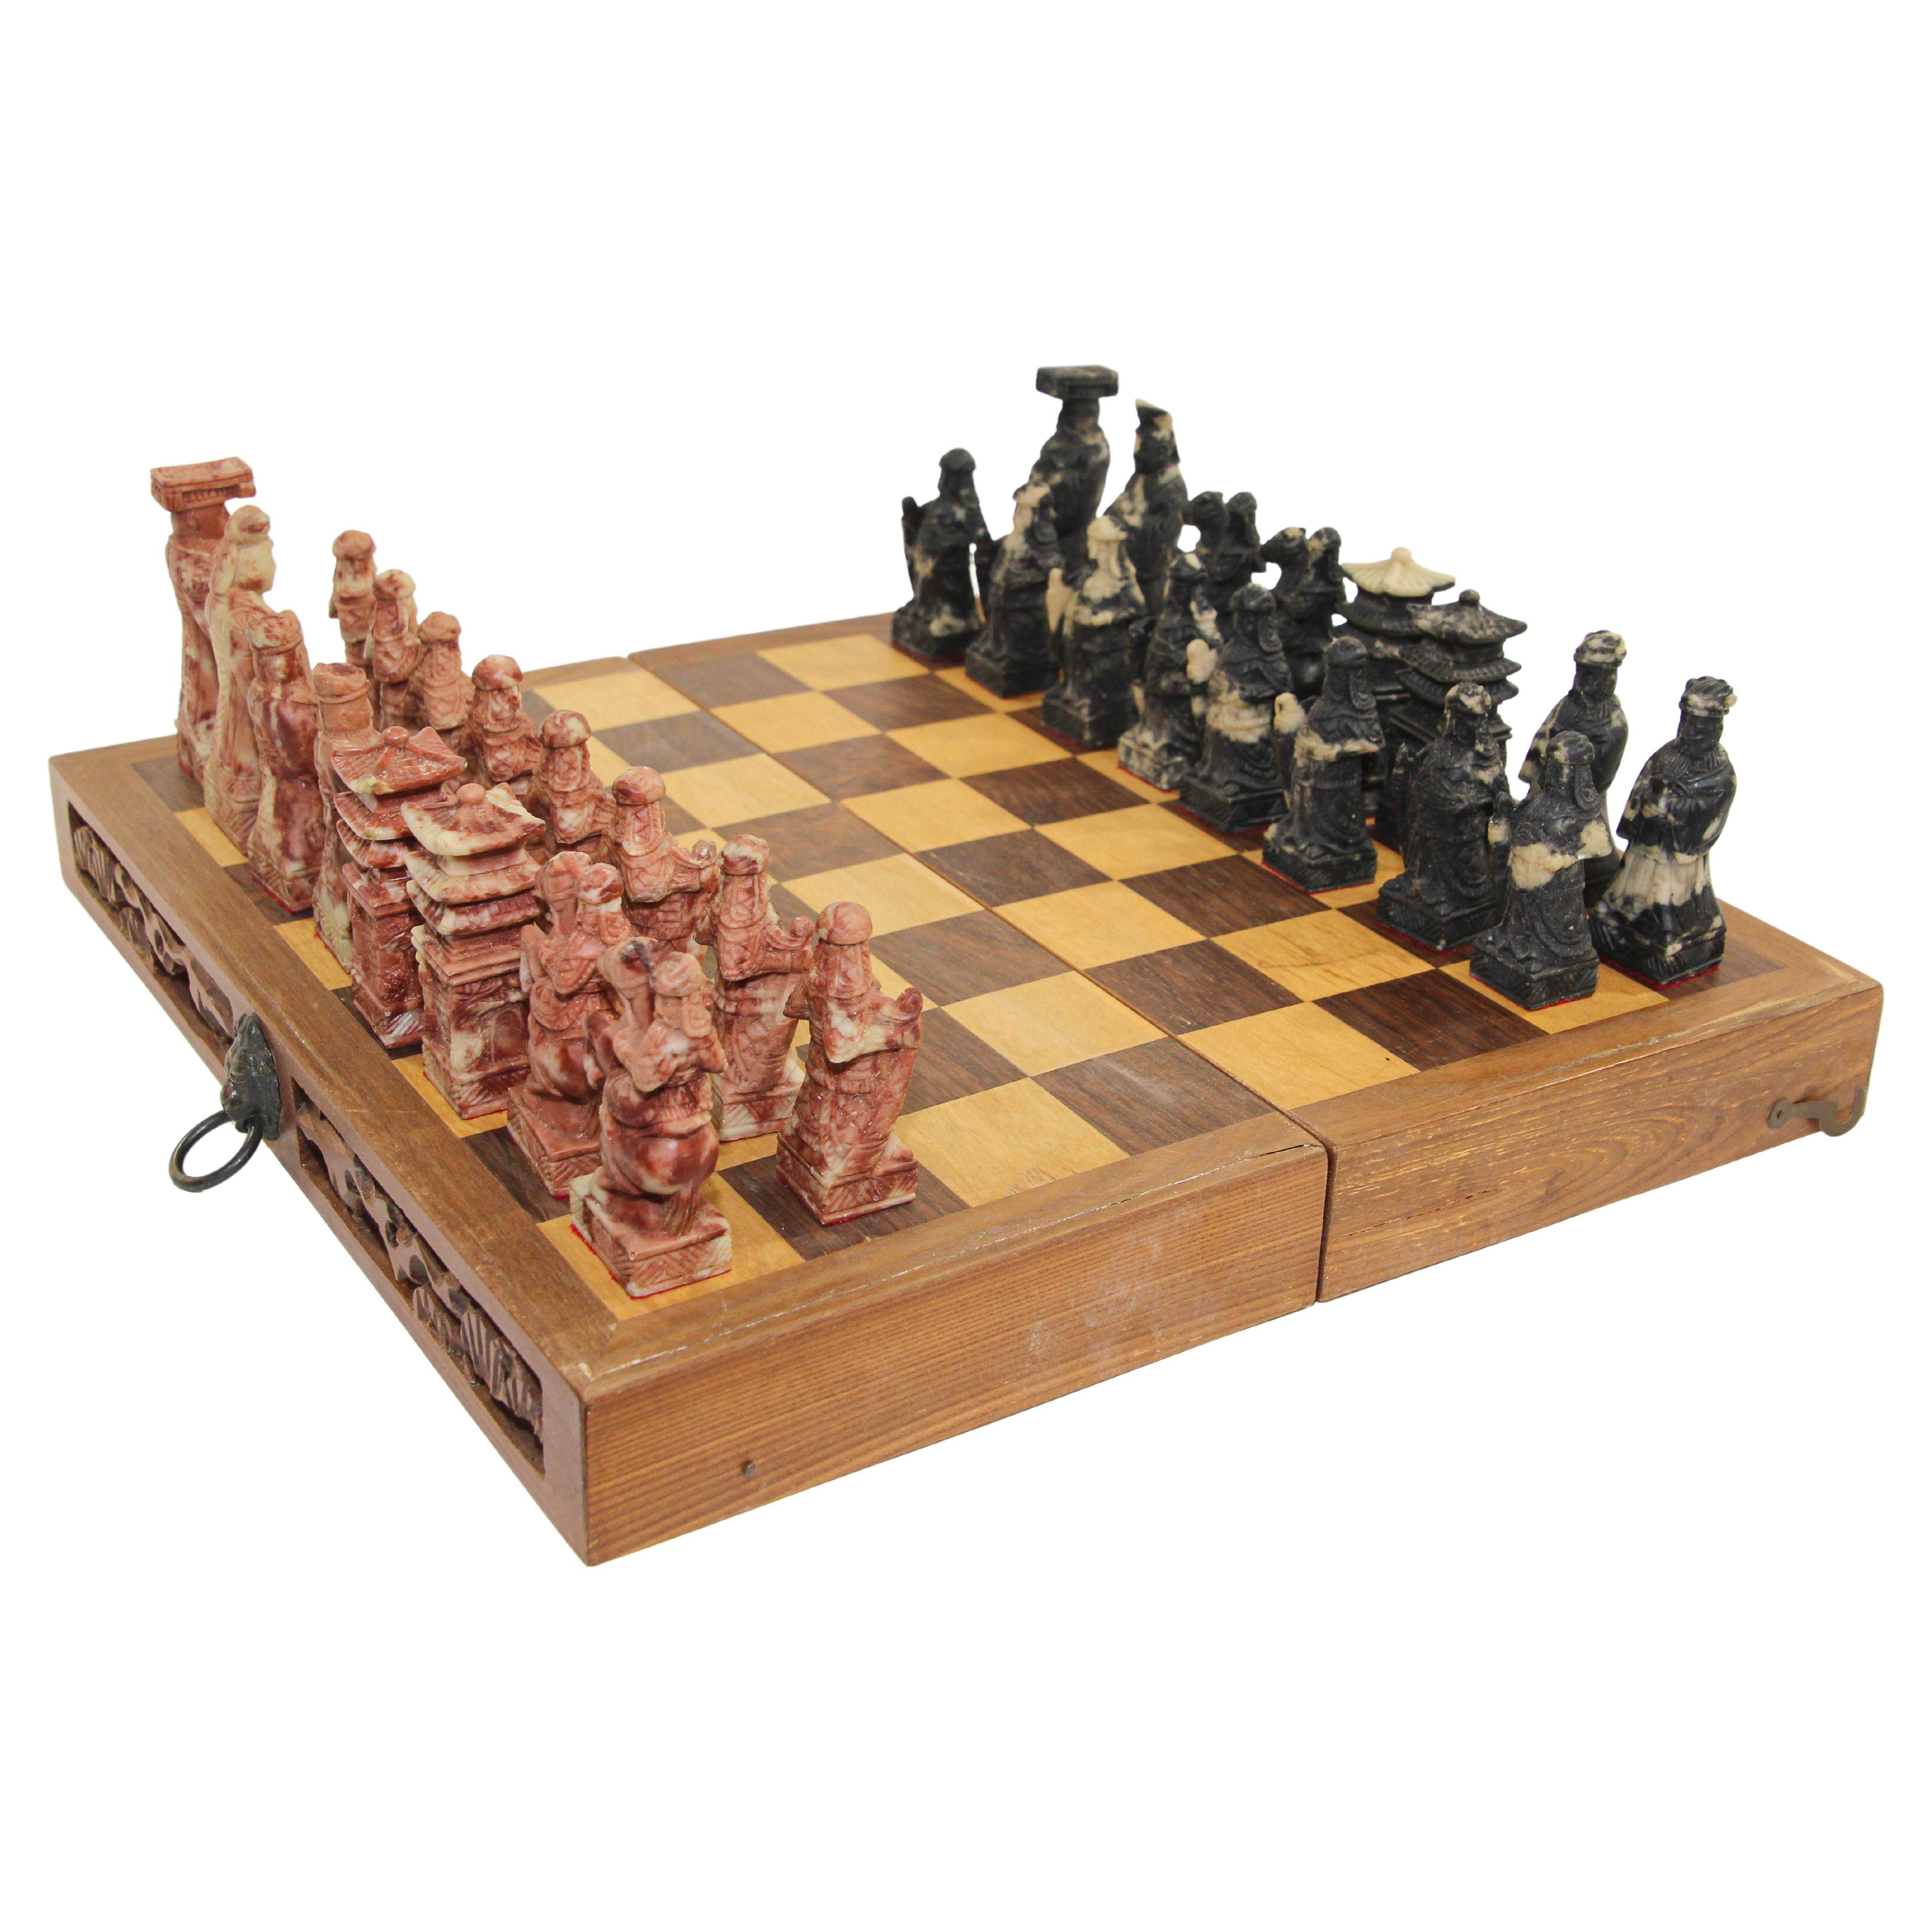 Details about   Hand Carving Drawn Japanese Chess Pieces Collectible Luxury Board Table Game Set 